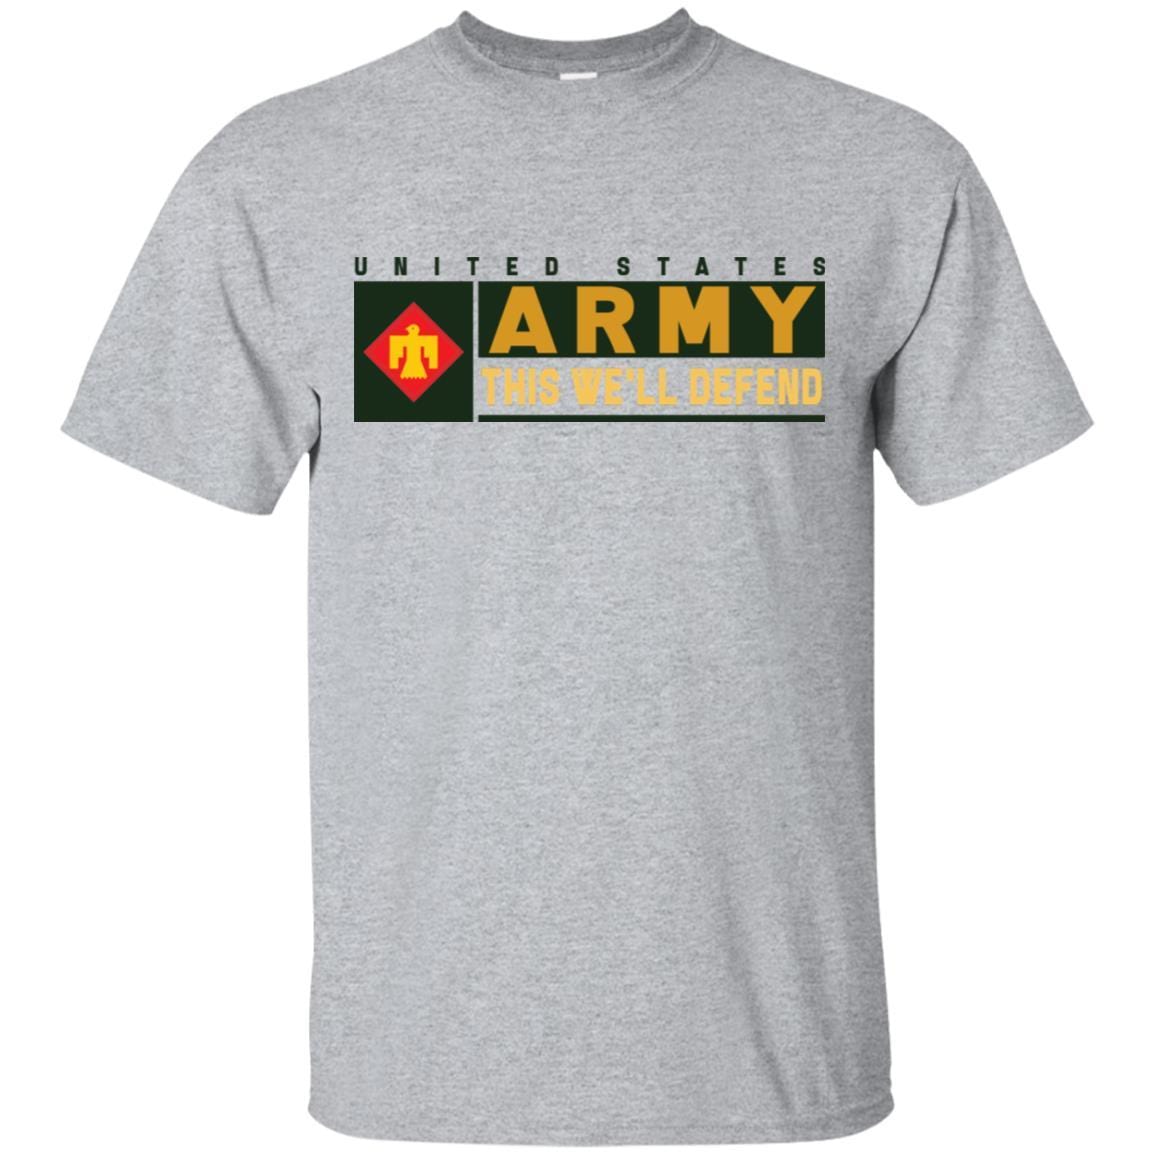 US Army 45TH INFANTRY BRIGADE COMBAT TEAM- This We'll Defend T-Shirt On Front For Men-TShirt-Army-Veterans Nation